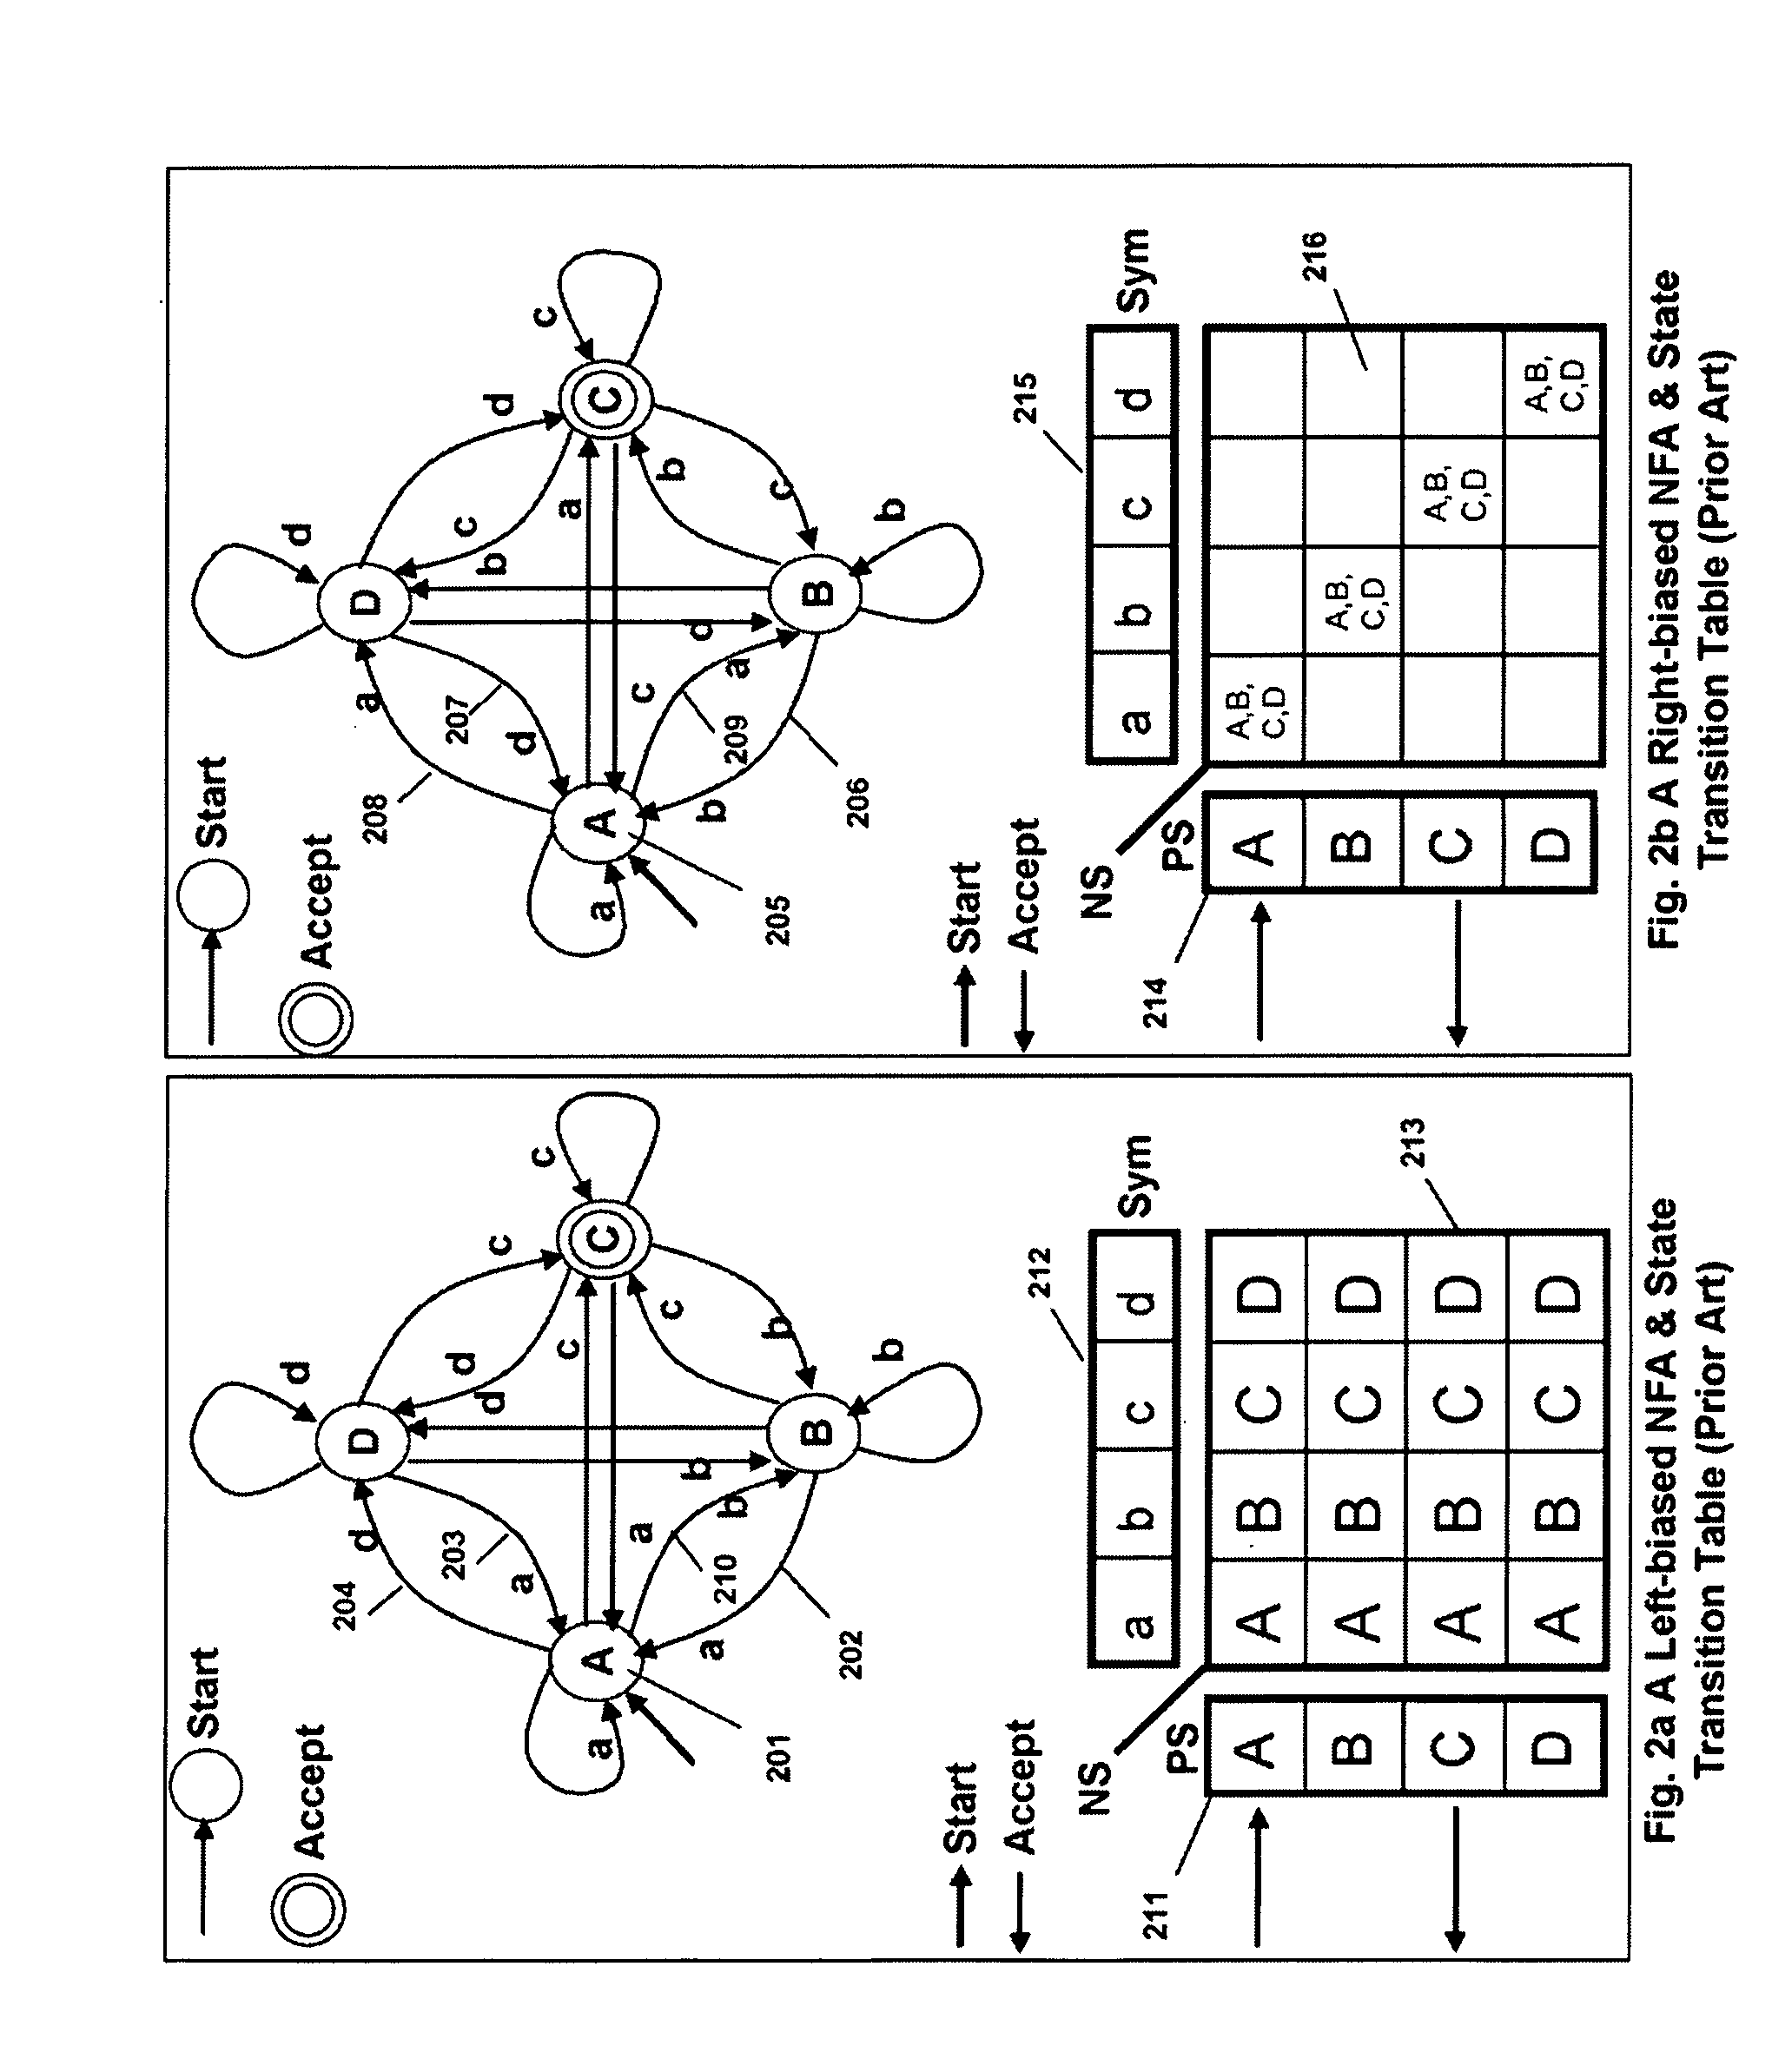 Signature Search Architecture for Programmable Intelligent Search Memory